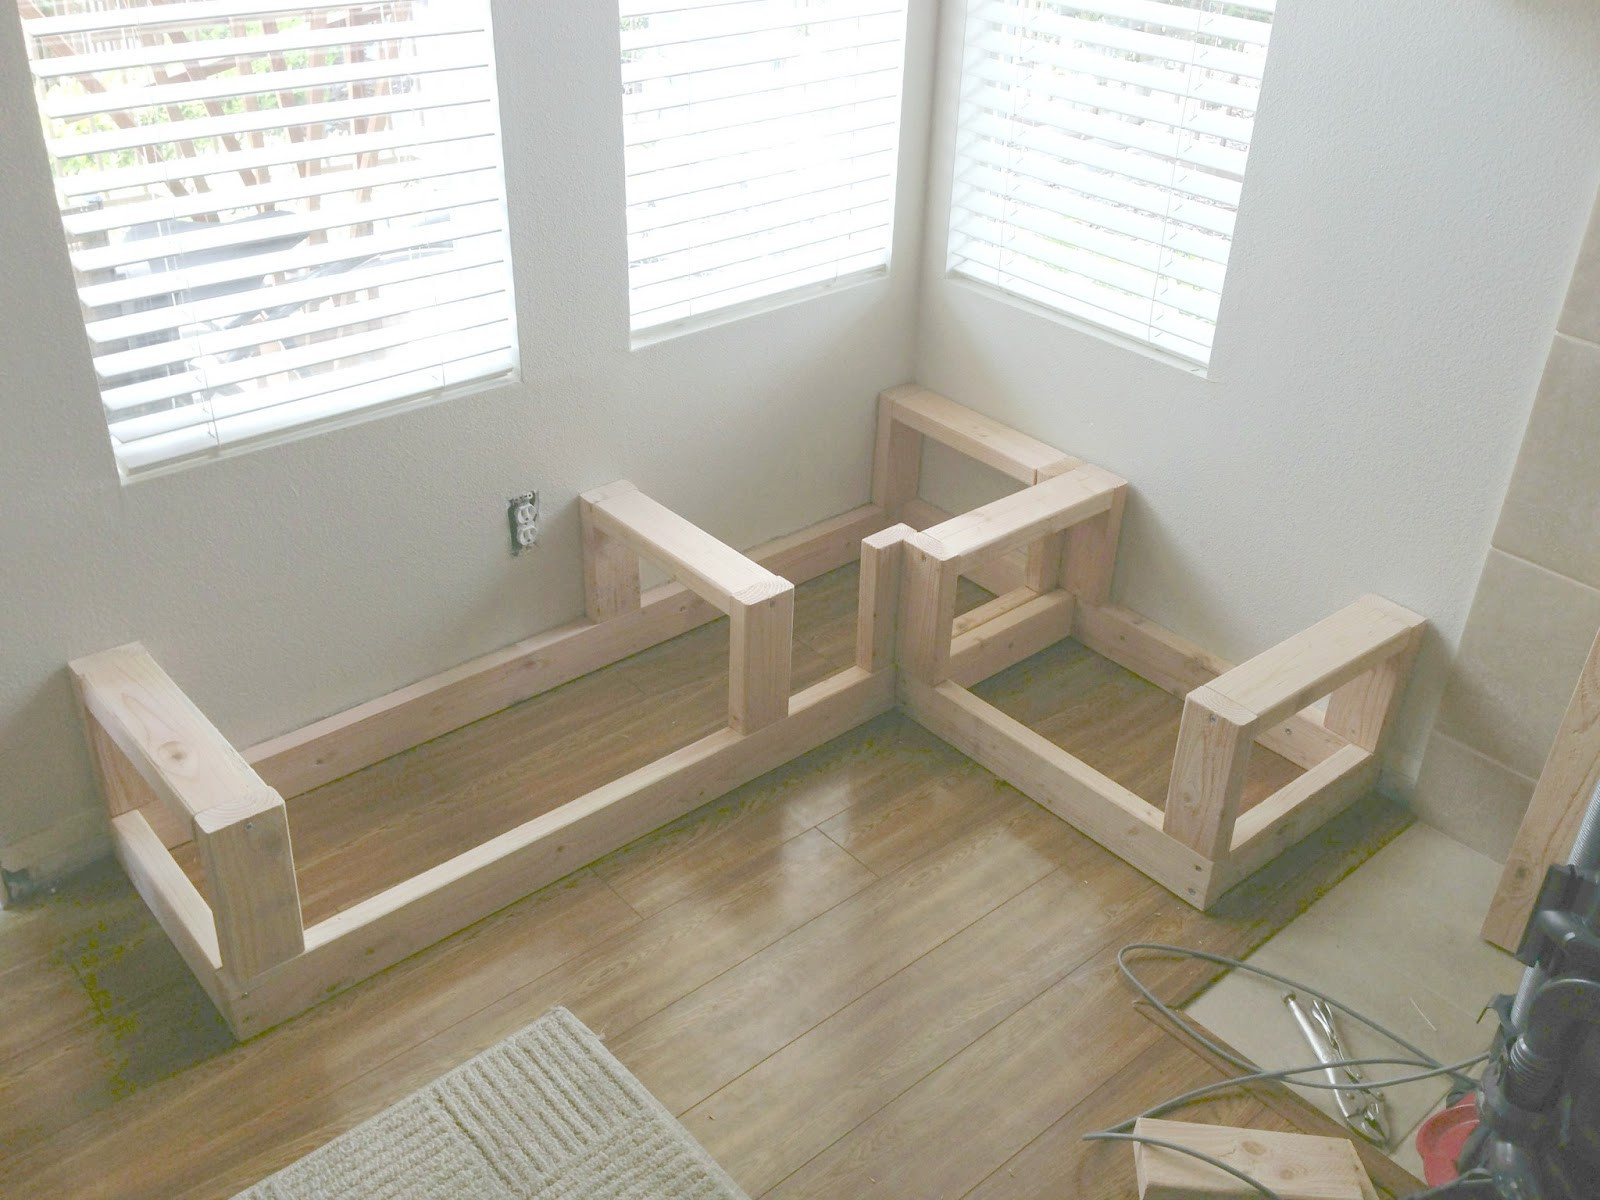 Kitchen Tables With Storage Benches
 The Good Life Takes Work Making a Corner Storage Bench